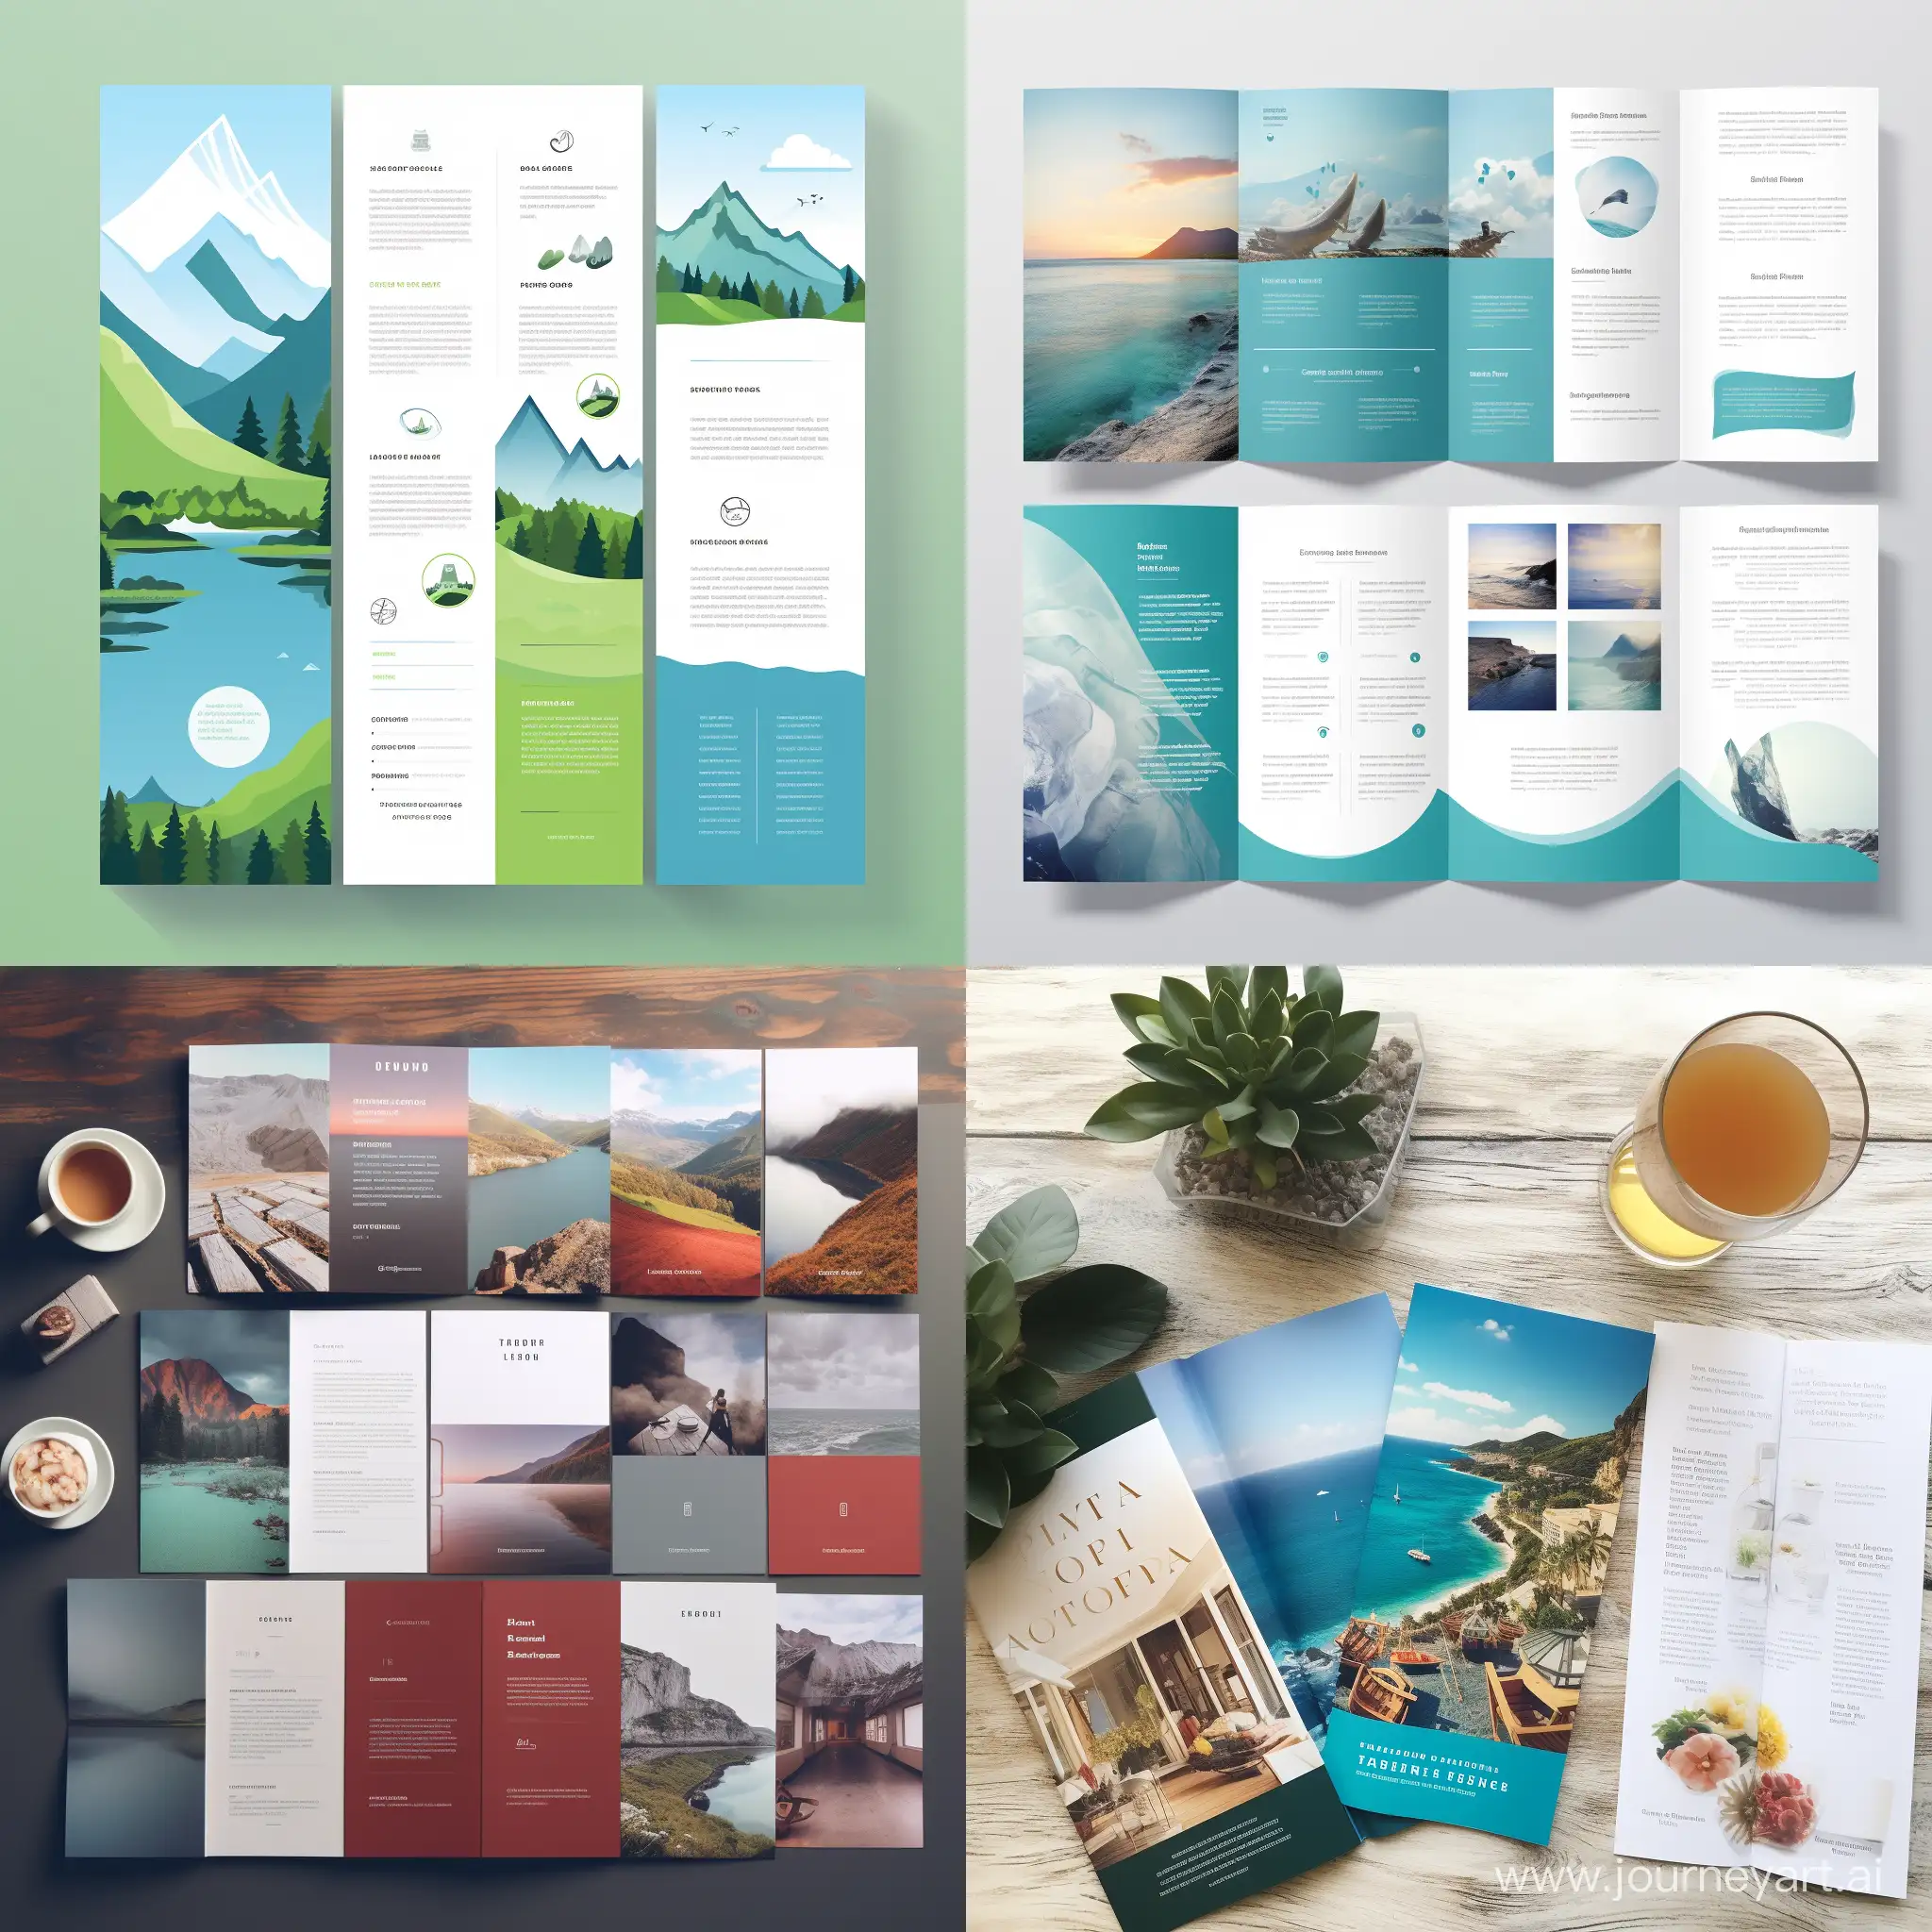 Effective-Brochure-Design-Tips-Crafting-Informative-and-Visually-Appealing-Brochures